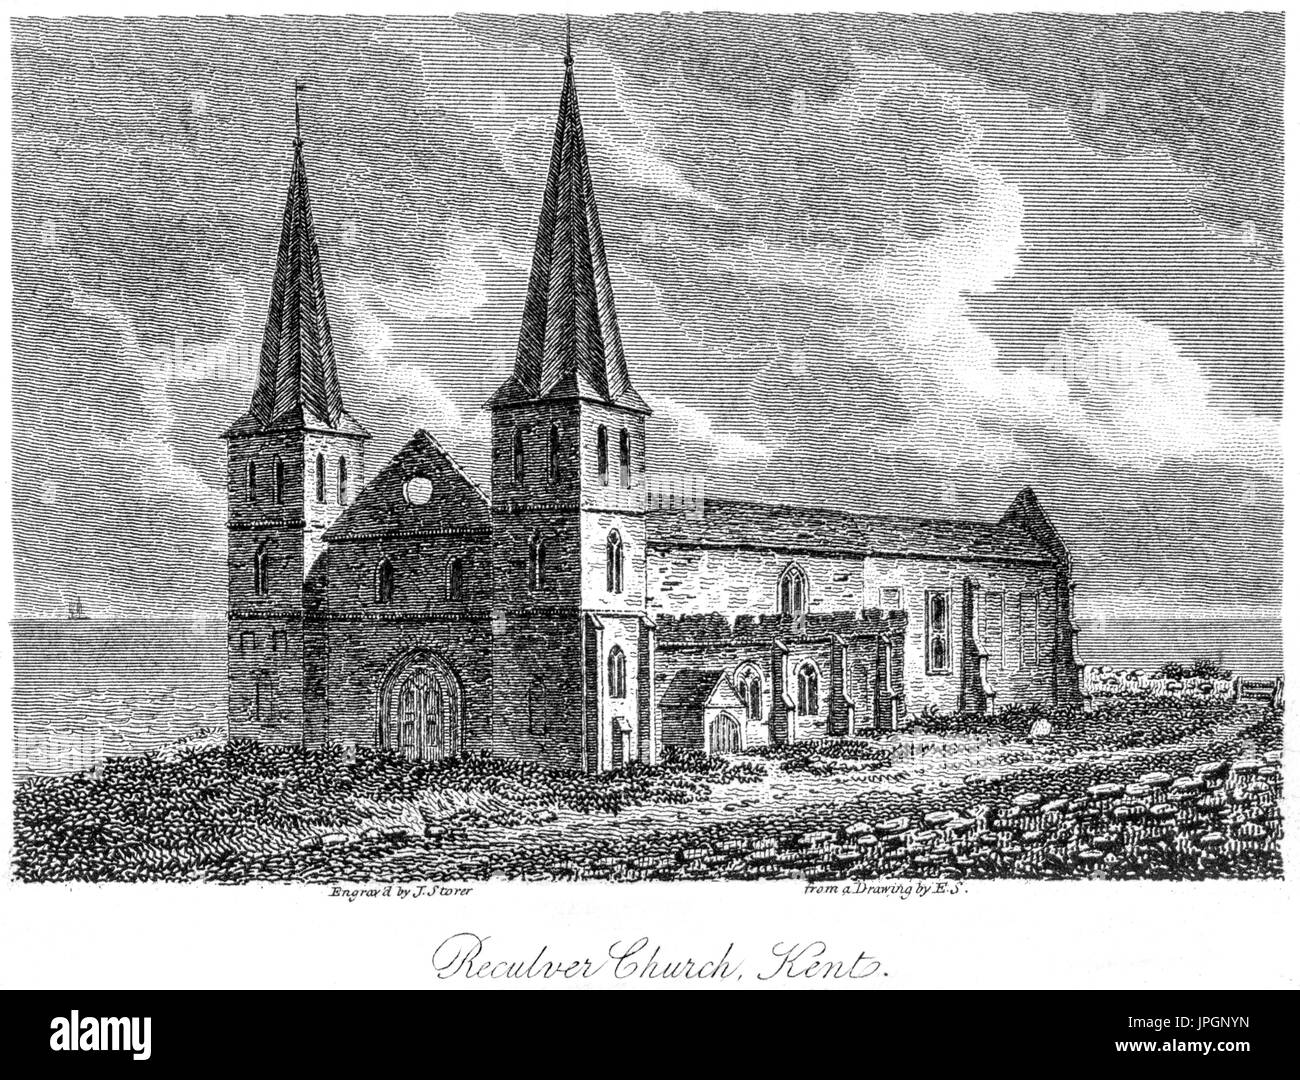 An engraving of Reculver Church, Kent scanned at high resolution from a book printed in 1808.  Believed copyright free. Stock Photo